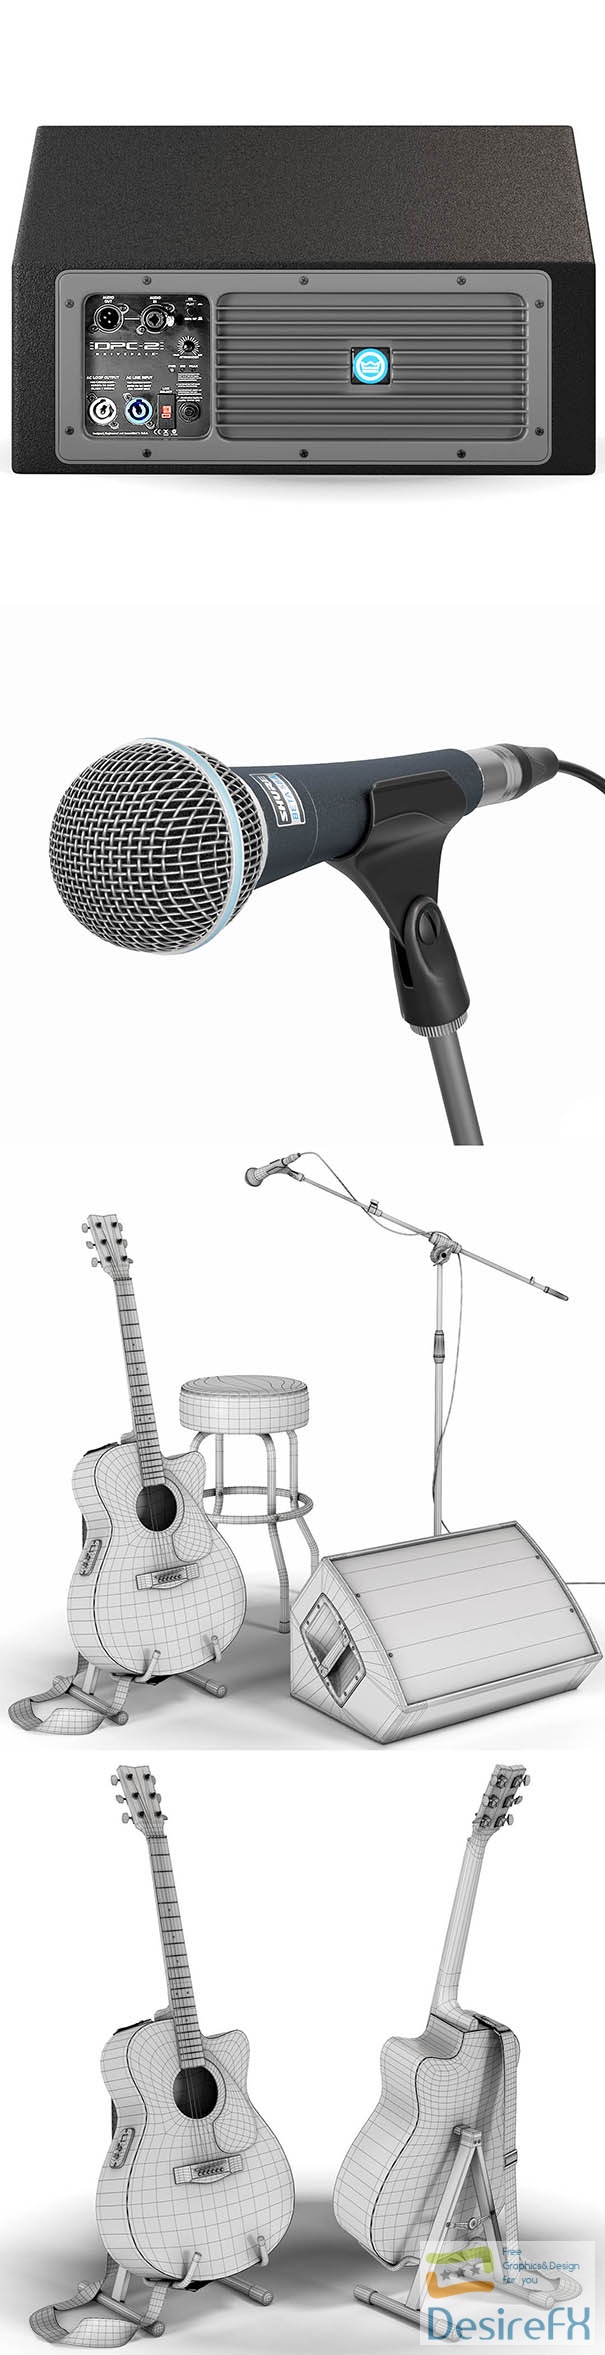 Guitar set for stage Musical instrument Microphone 3D Model